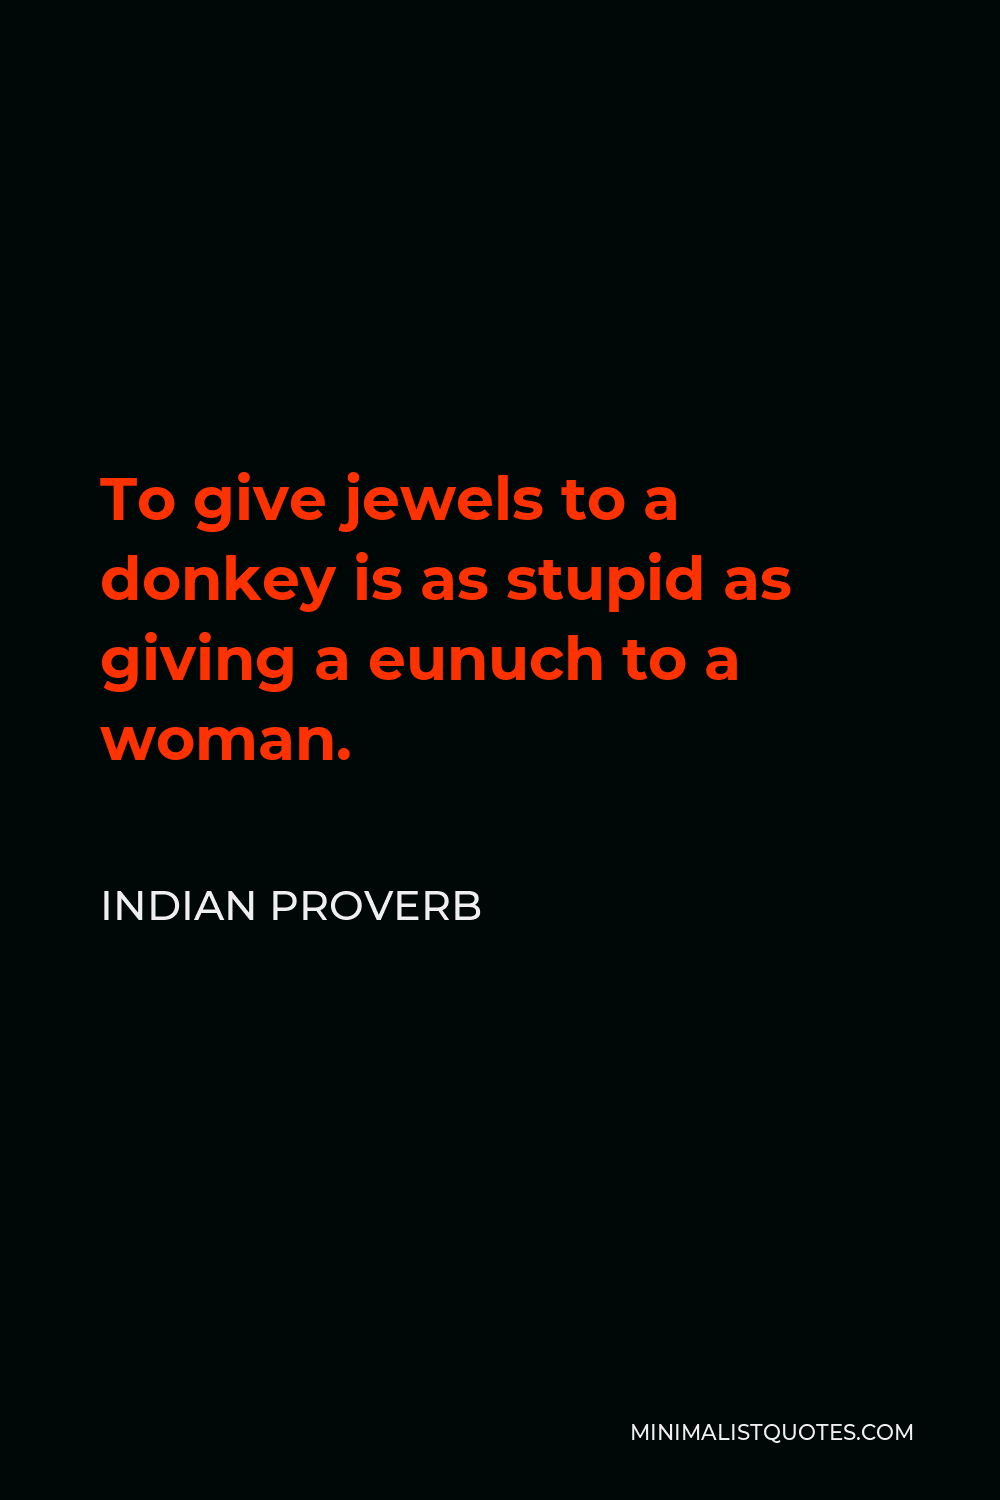 Indian Proverb Quote - To give jewels to a donkey is as stupid as giving a eunuch to a woman.